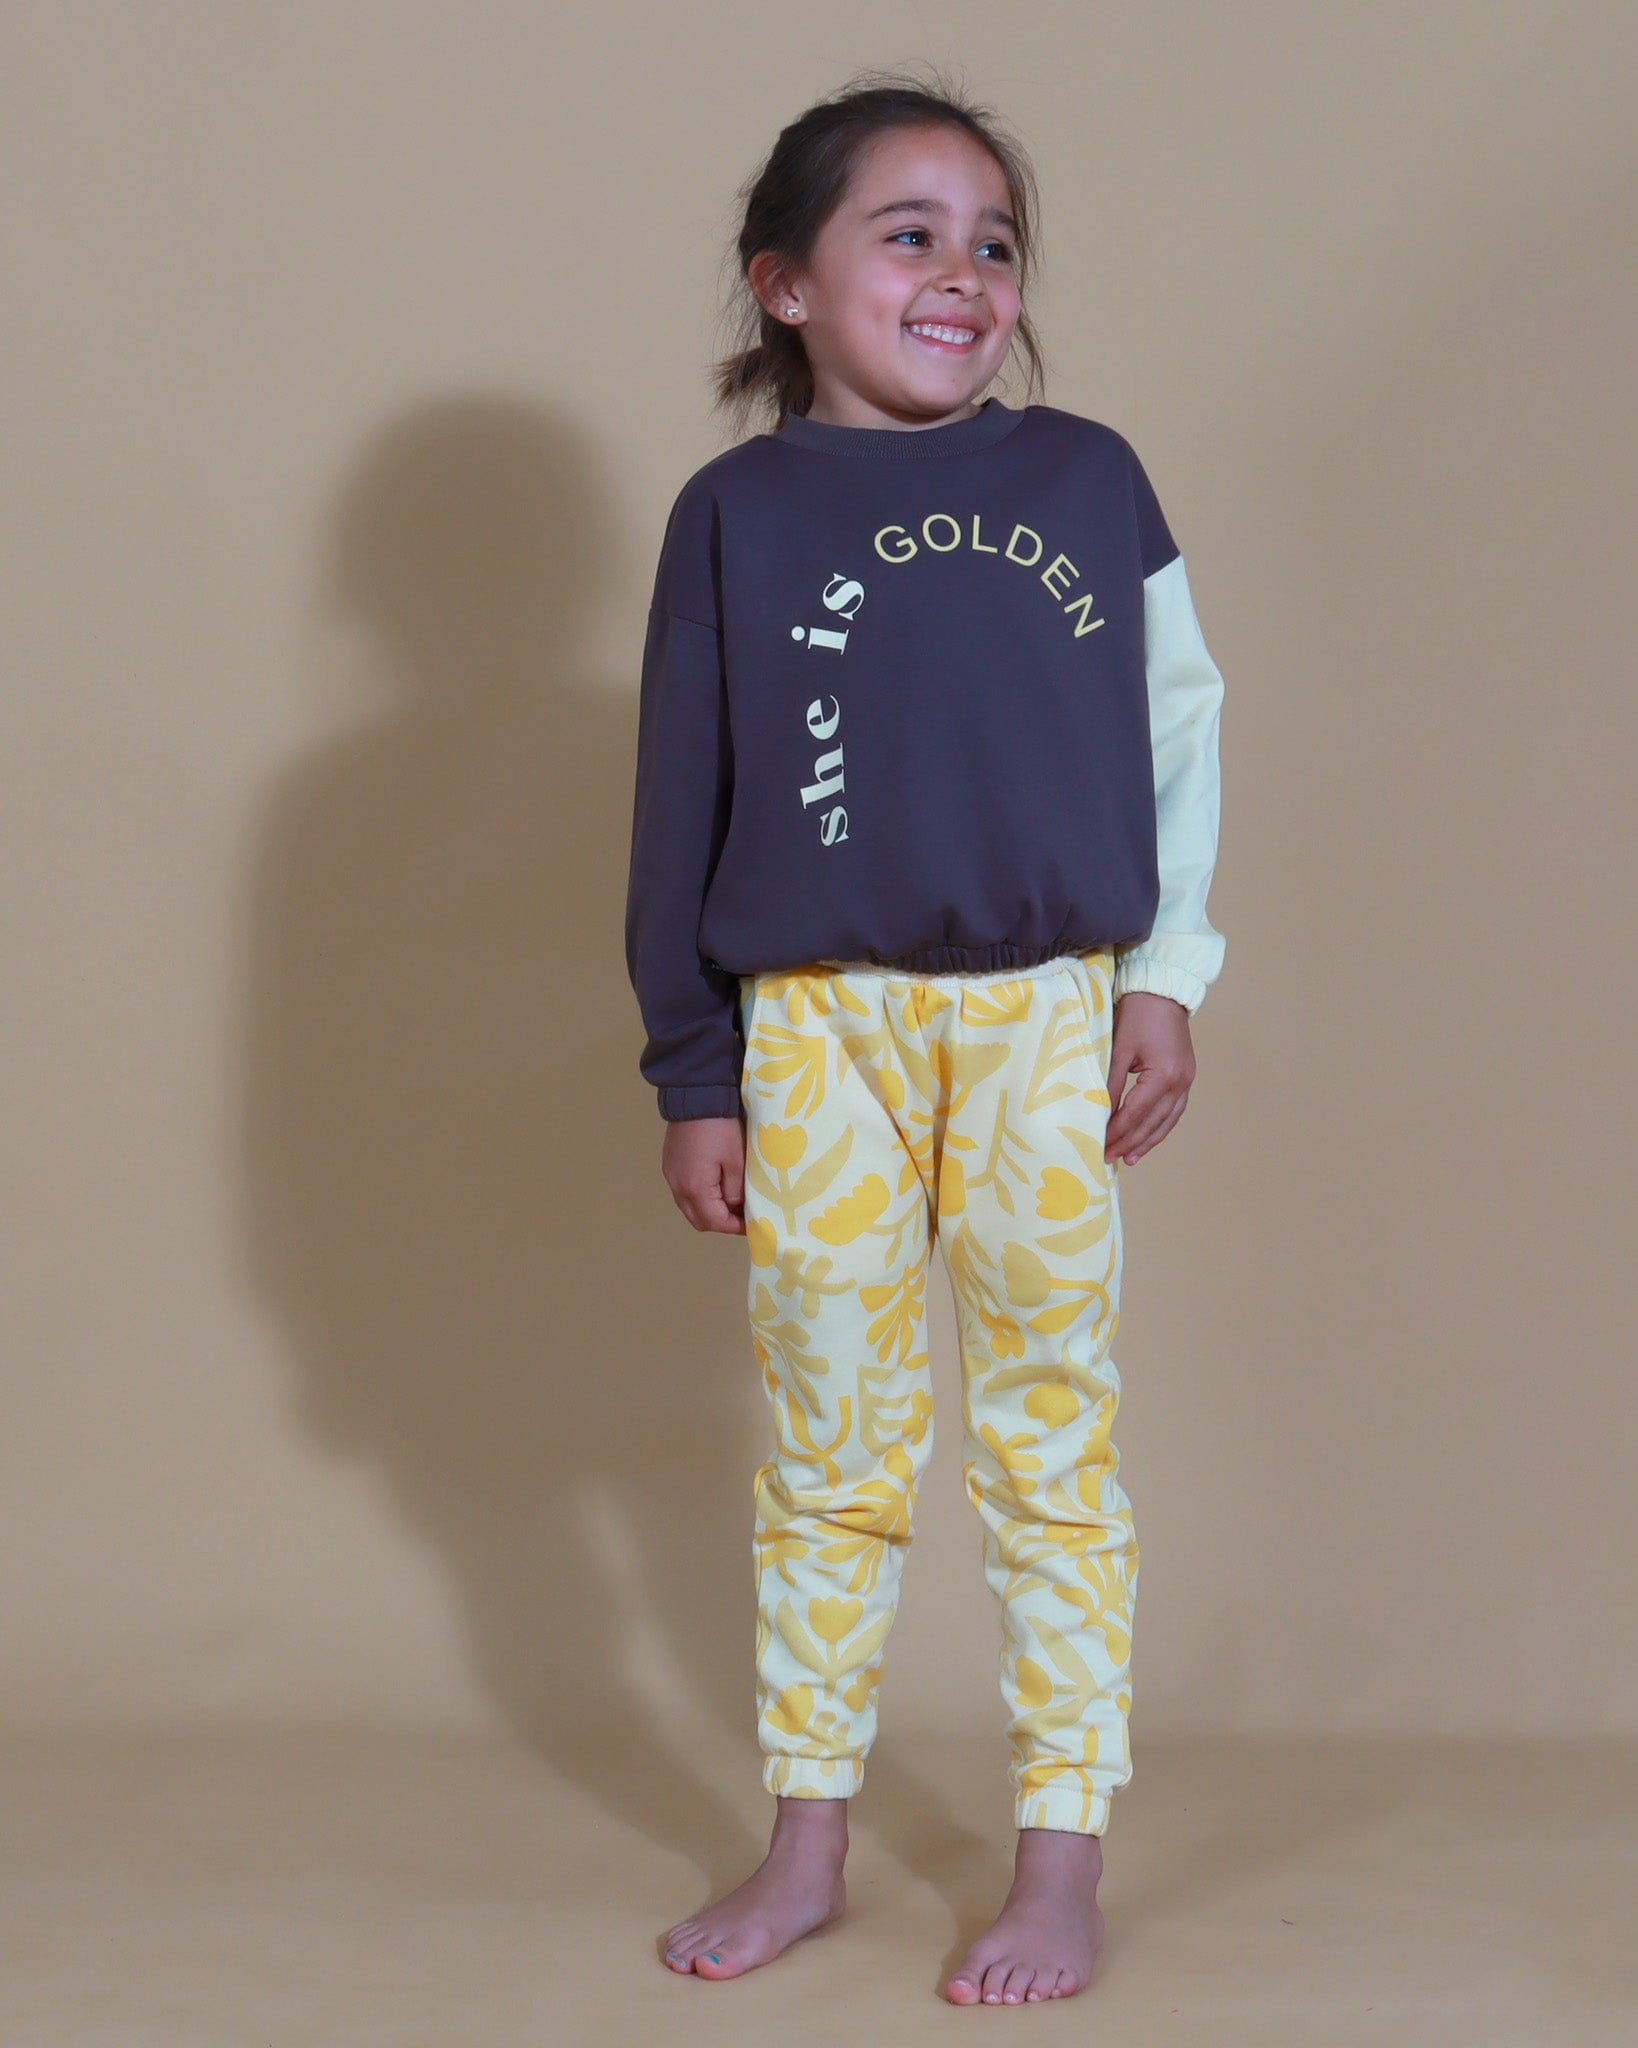 Tiny Tribe Girls Top She Is Golden Drop Shoulder Sweat Top